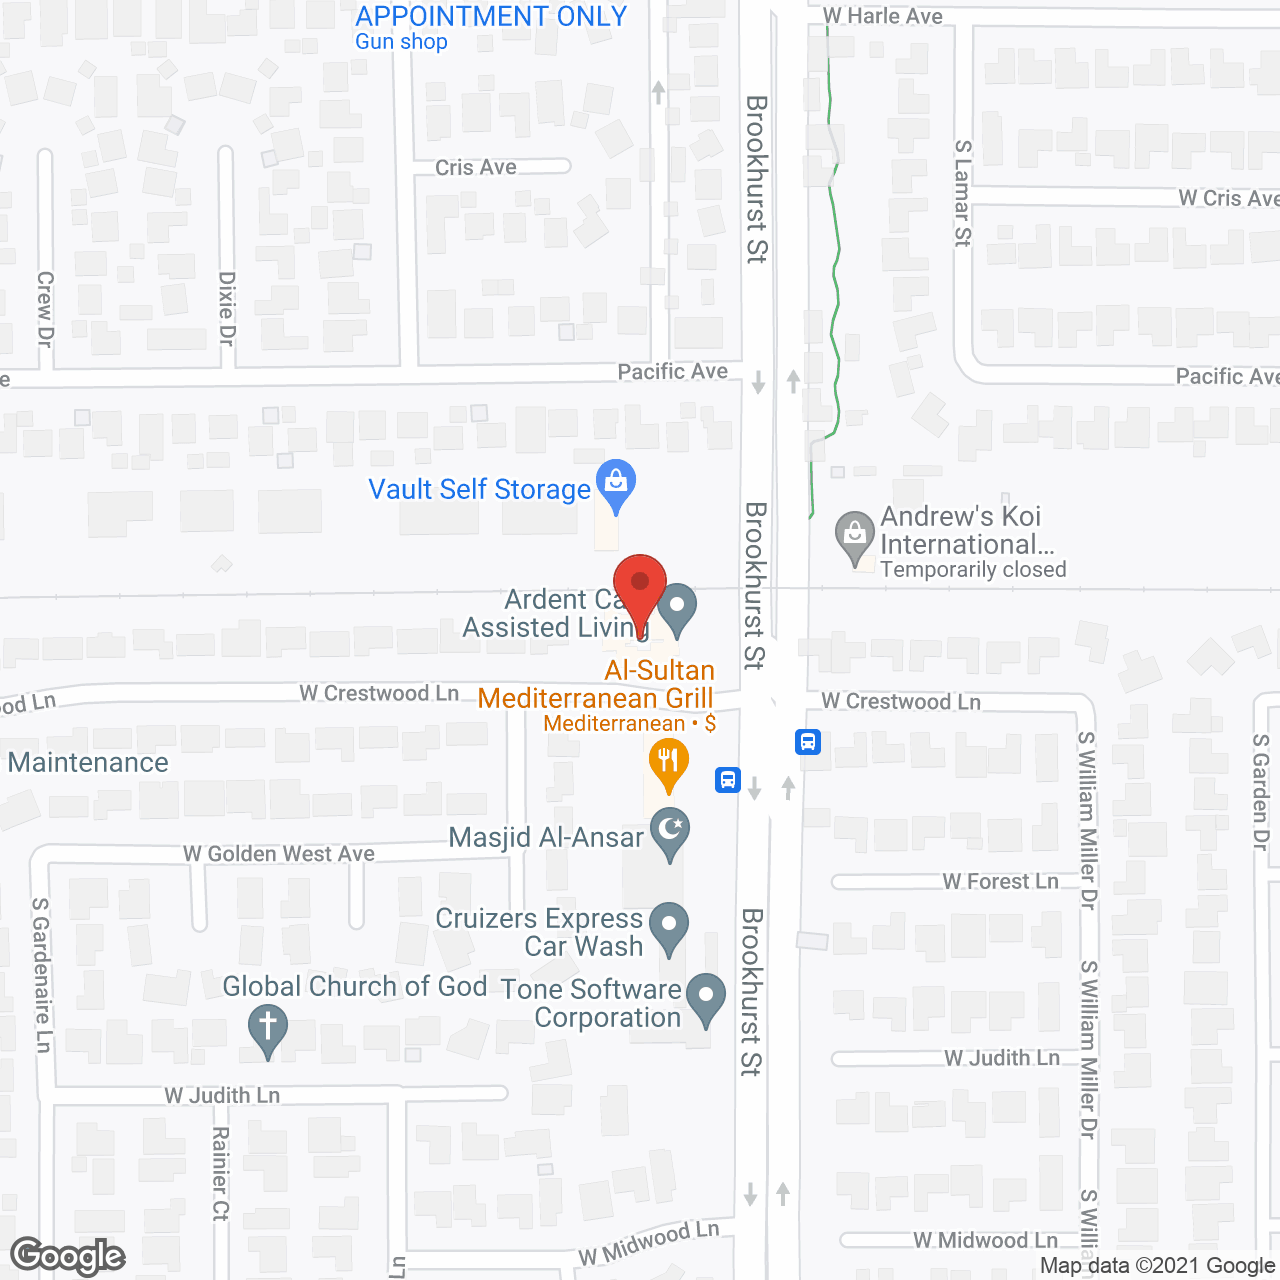 Ardent Care Assisted Living in google map